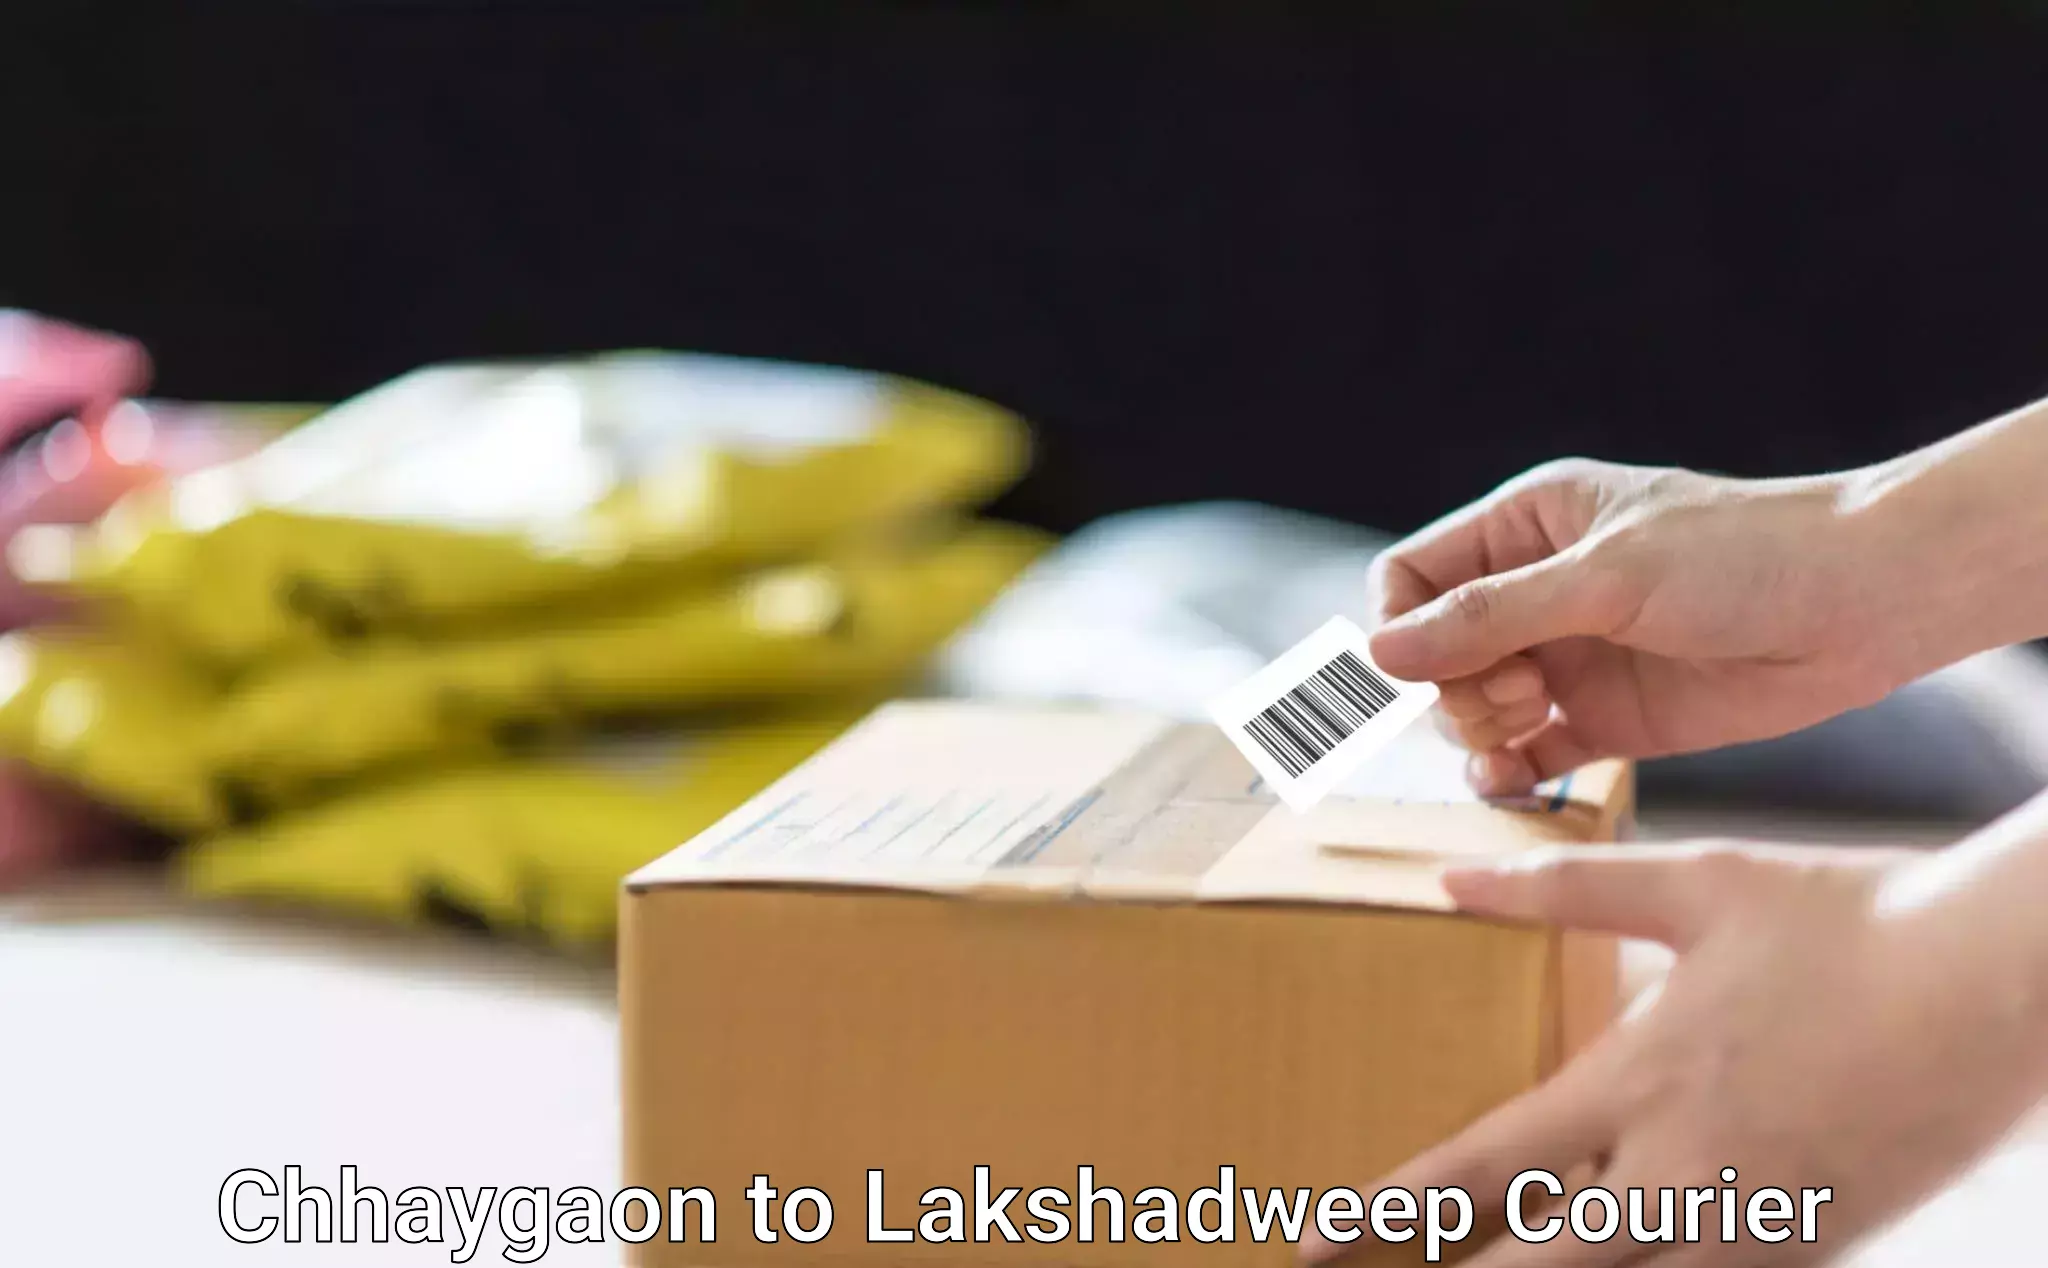 Courier app Chhaygaon to Lakshadweep